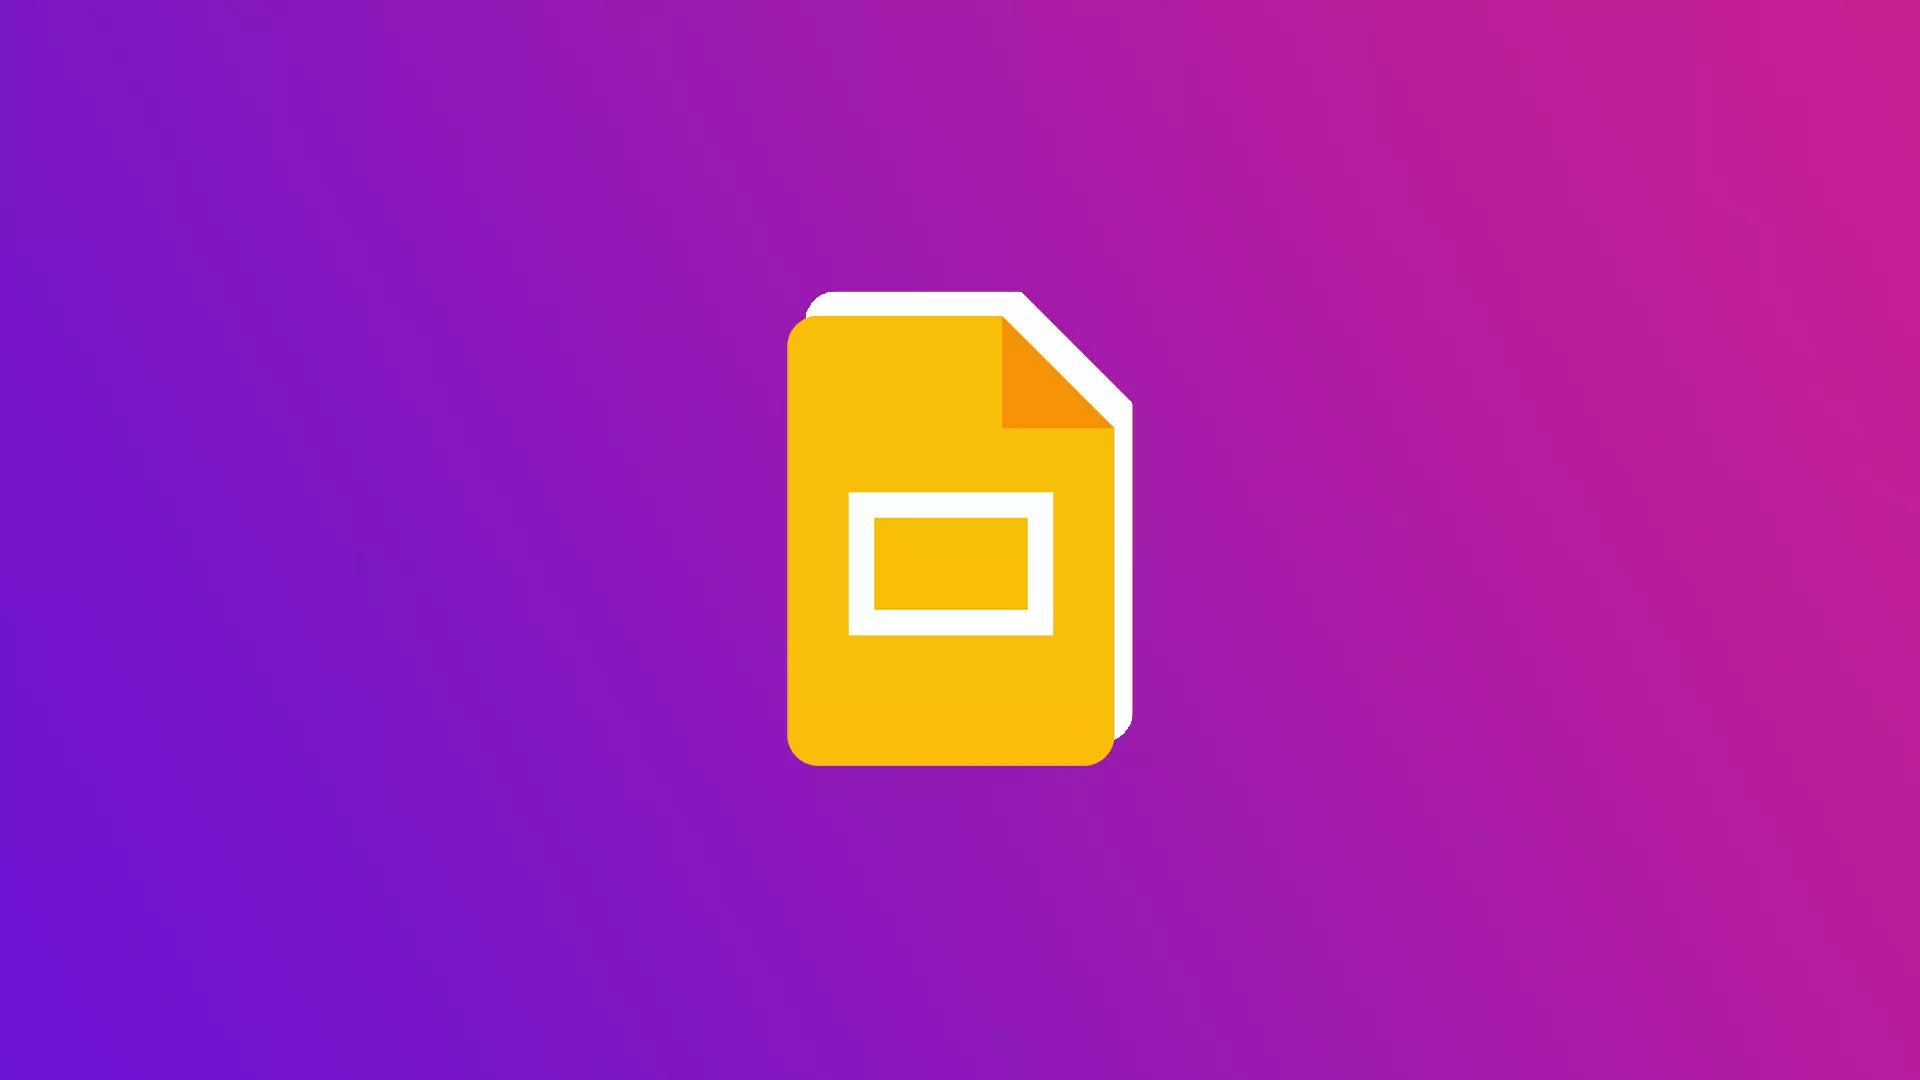 How to add a header or footer to Google Slides